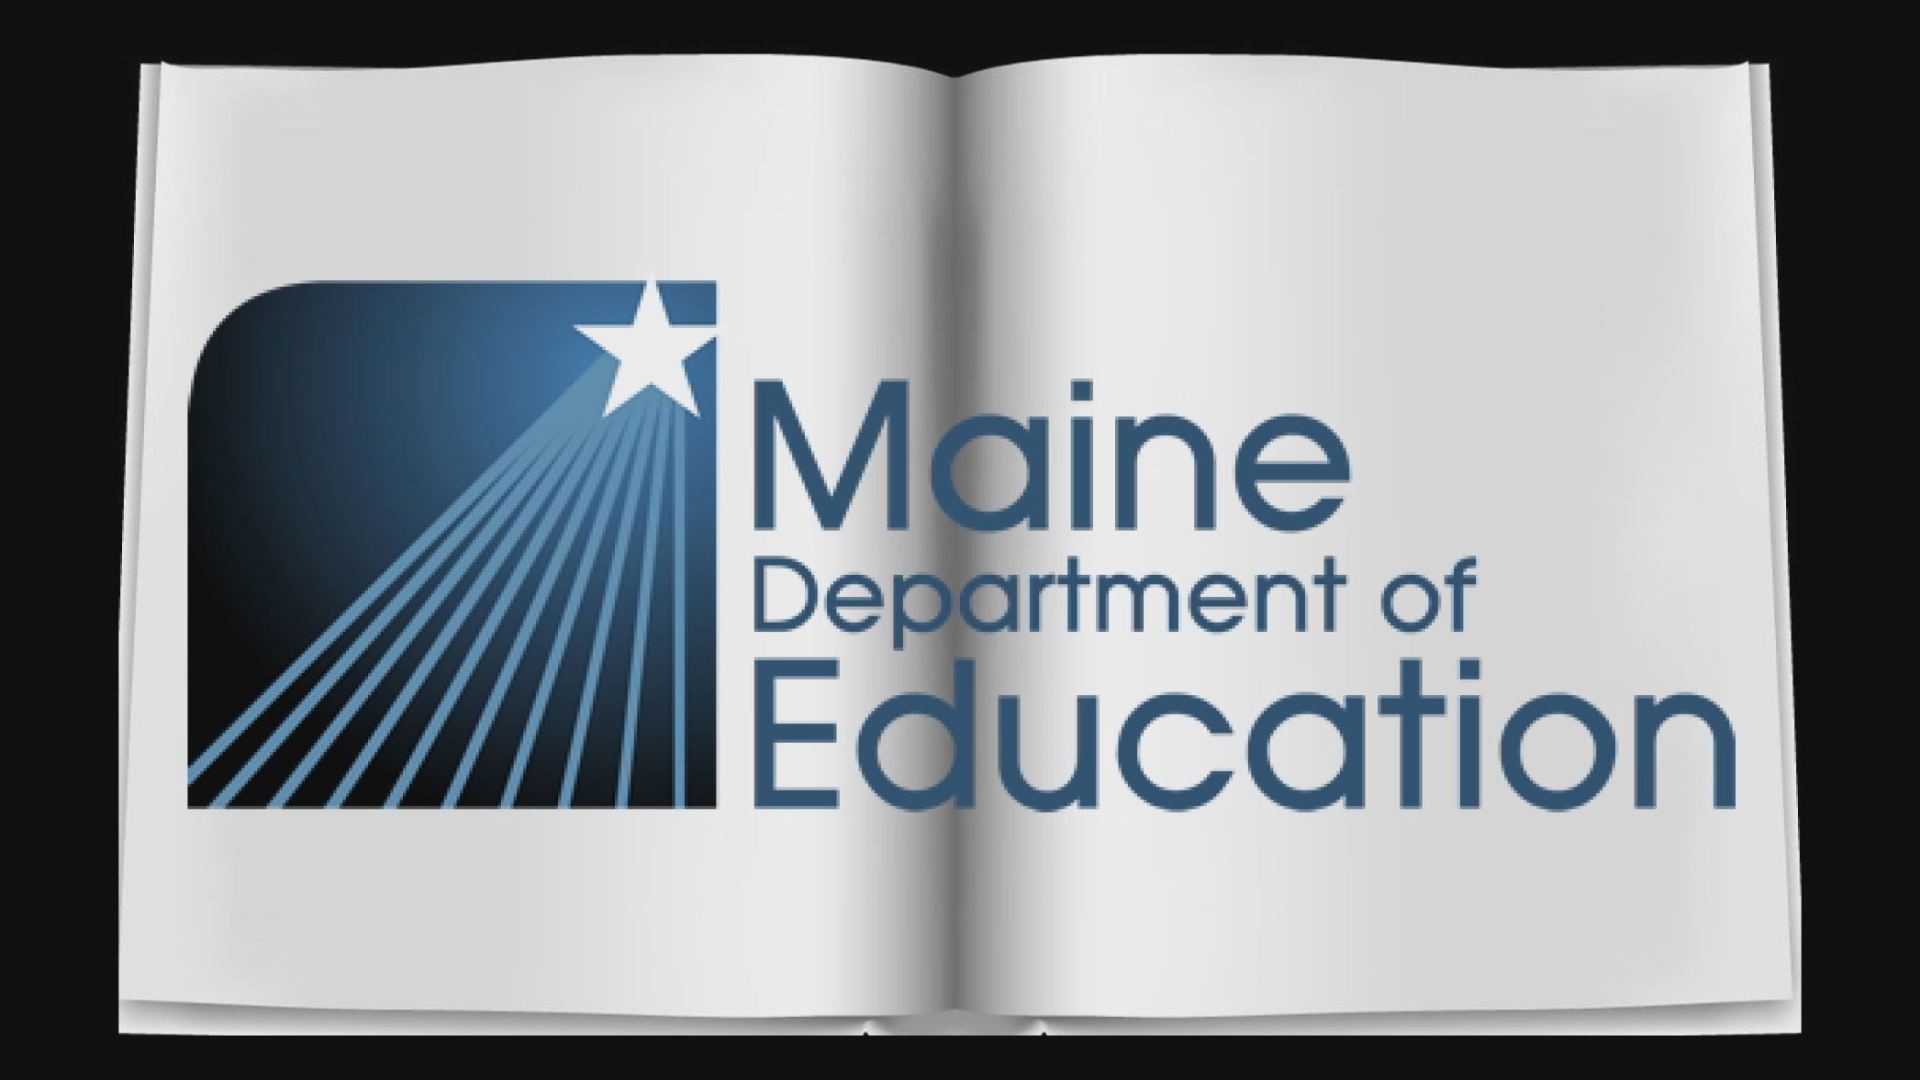 NEWS CENTER Maine's Jackie Mundry sits down with Maine Department of Education Commissioner, Pender Makin as parents across the state push for school 5 days a week